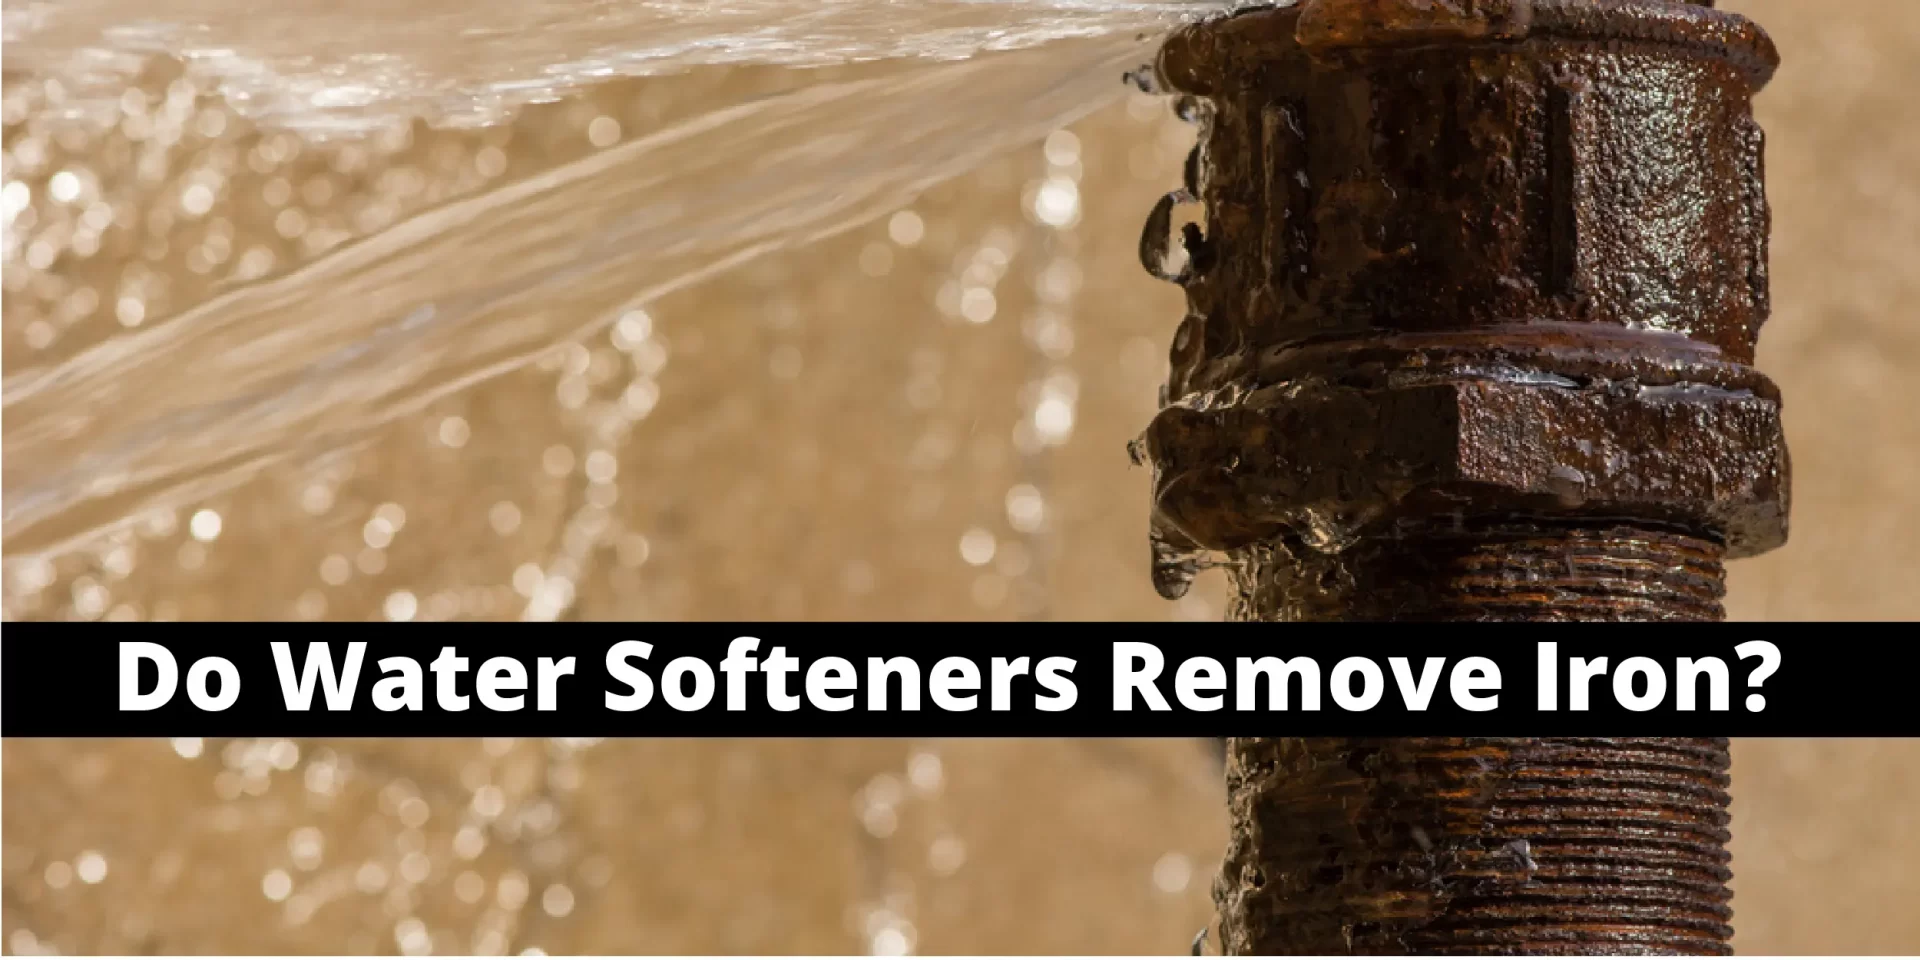 Can Iron be Filtered Out with a Water Softener?